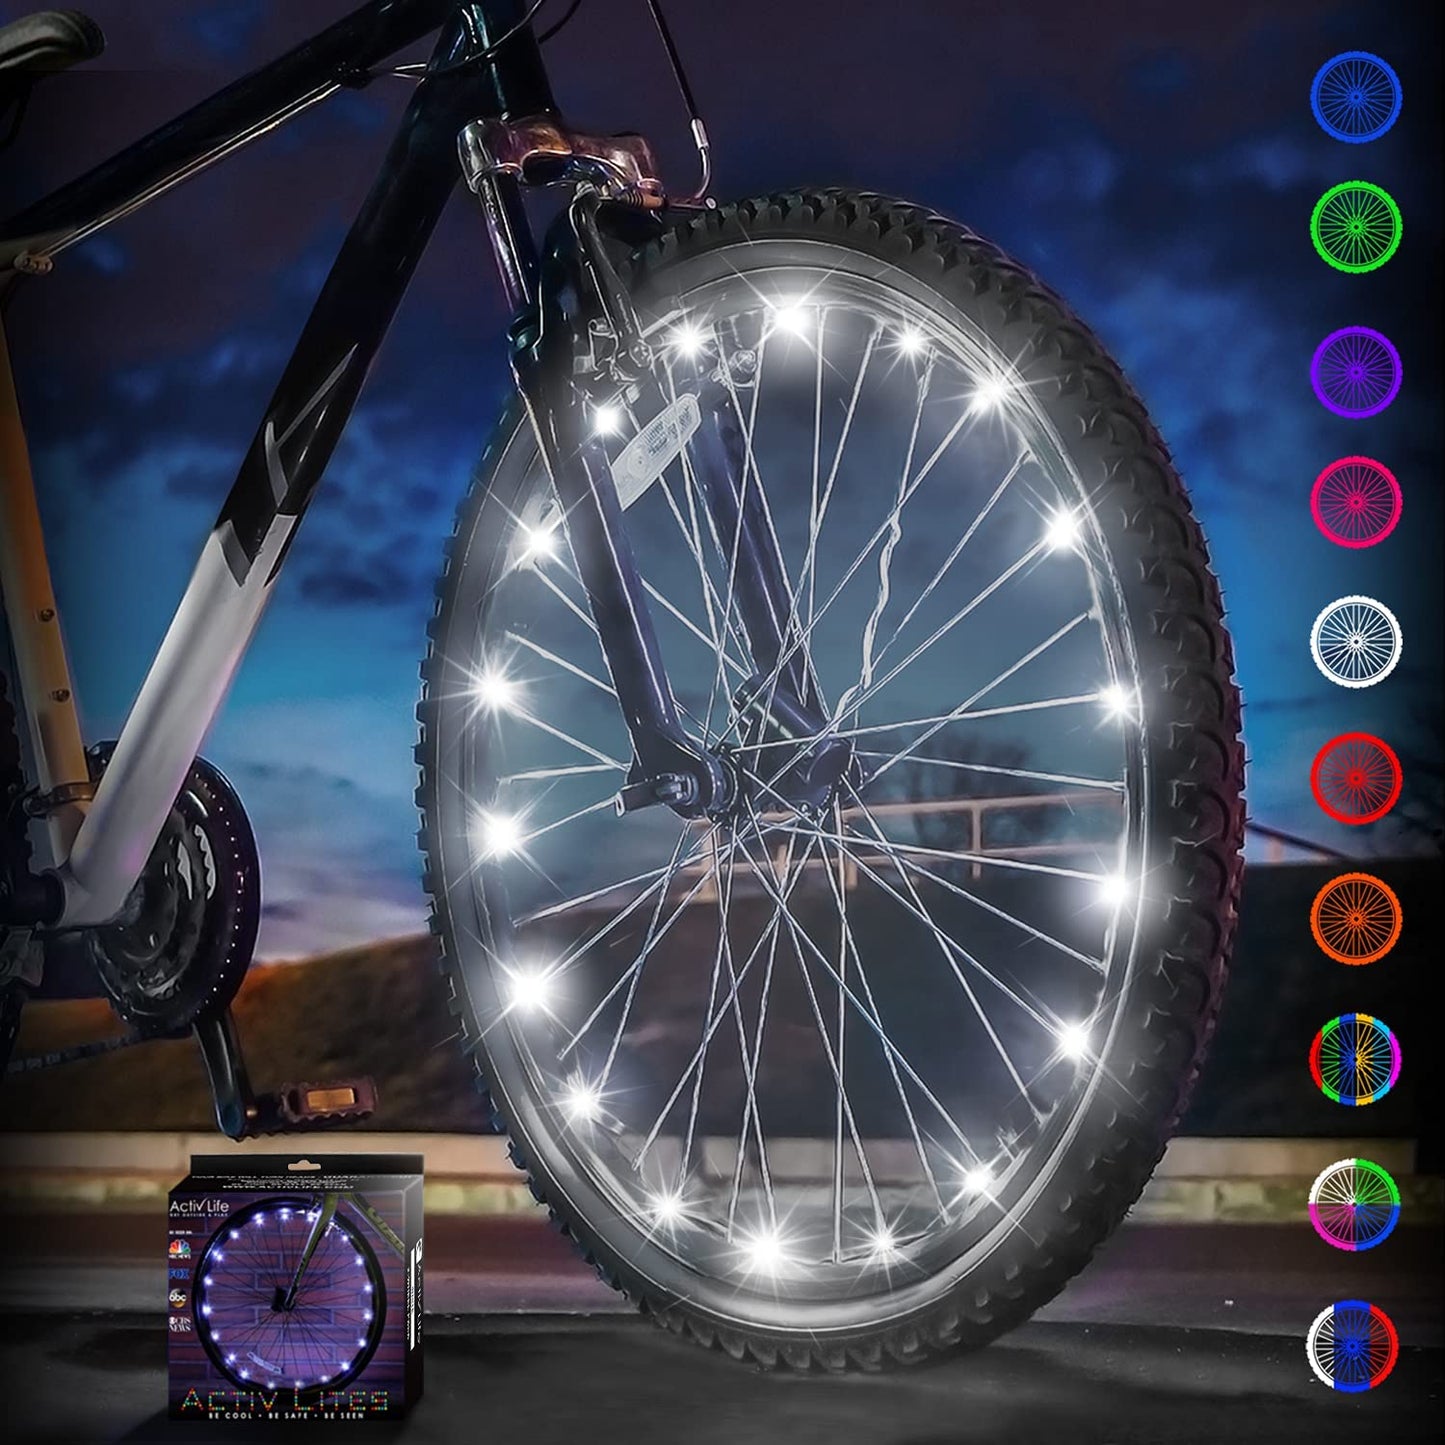 LED Bike Wheel Lights with Batteries Included! Get 100% Brighter and Visible from All Angles for Ultimate Safety & Style (1 Tire Pack)